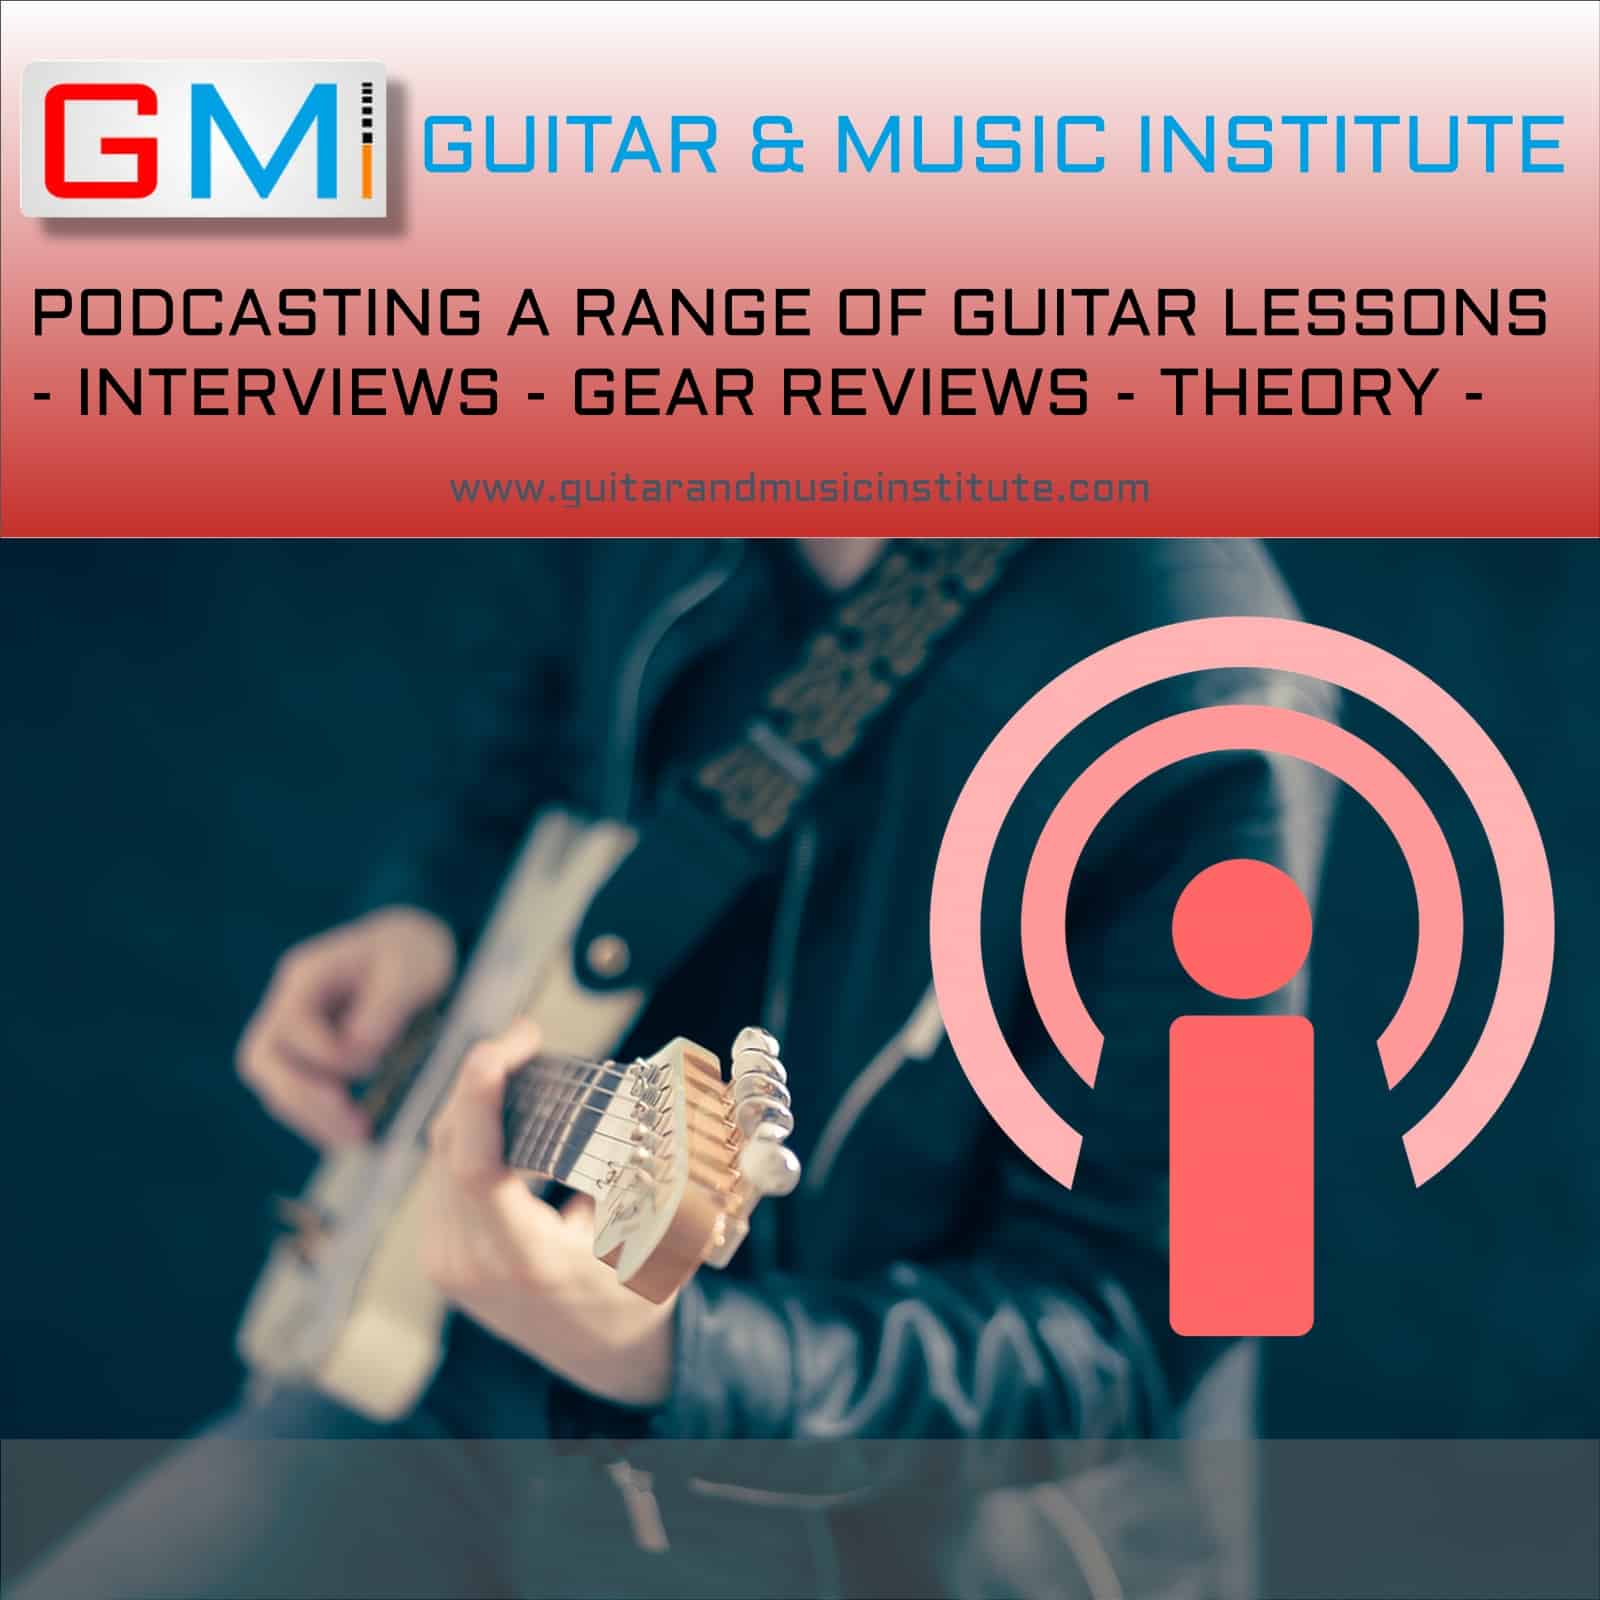 GMI - Guitar And Music Institute Guitar Podcasts